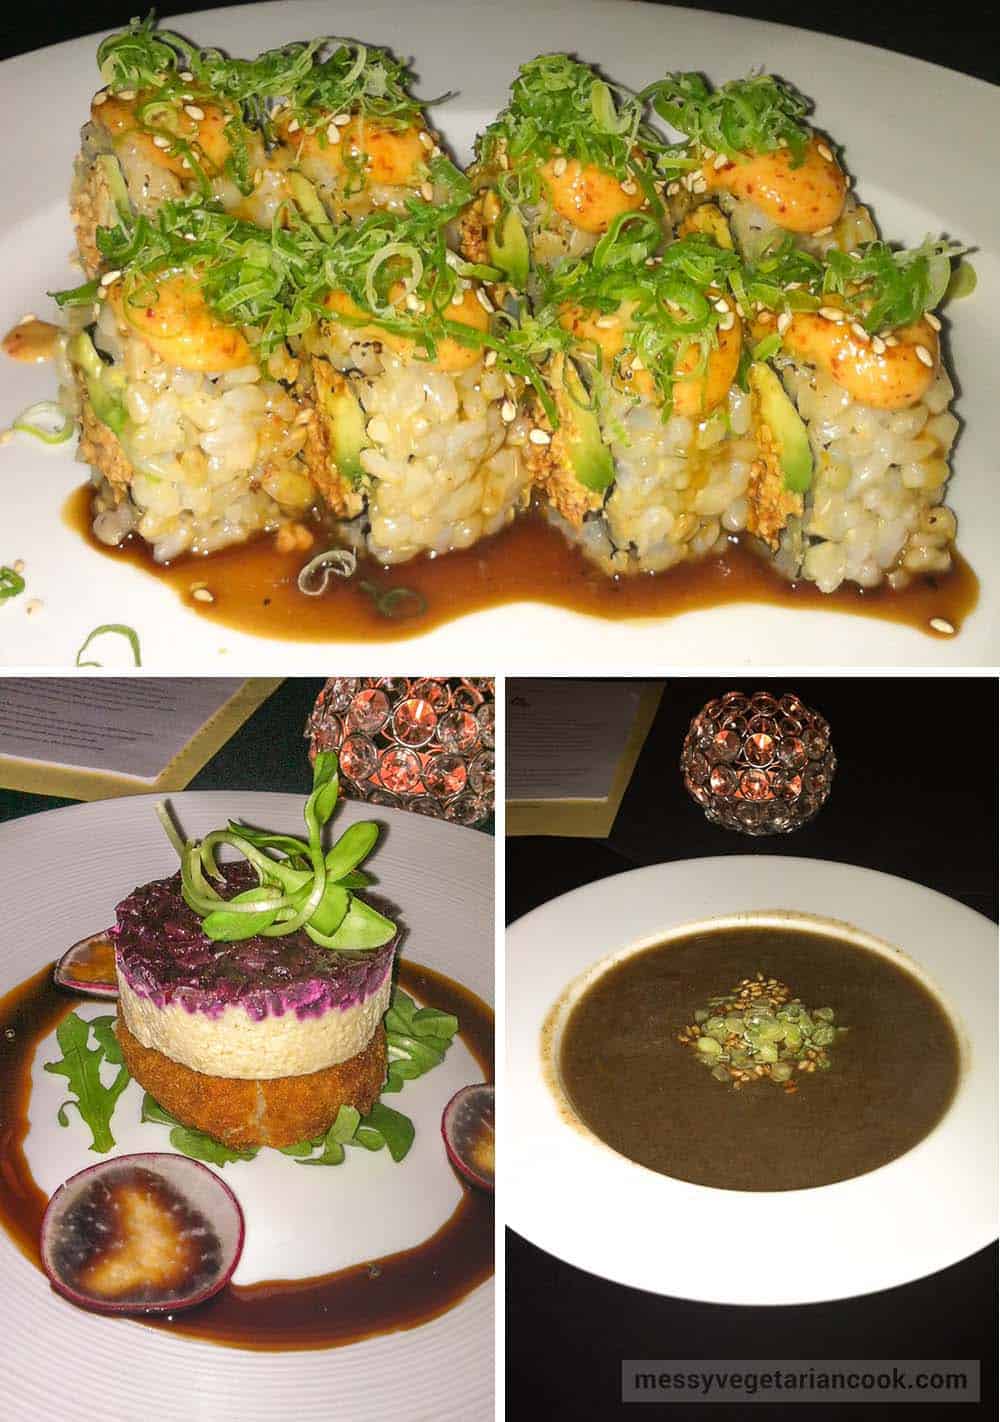 Dynamite rolls, crab cake tartar, French onion soup from Shojin Culver City